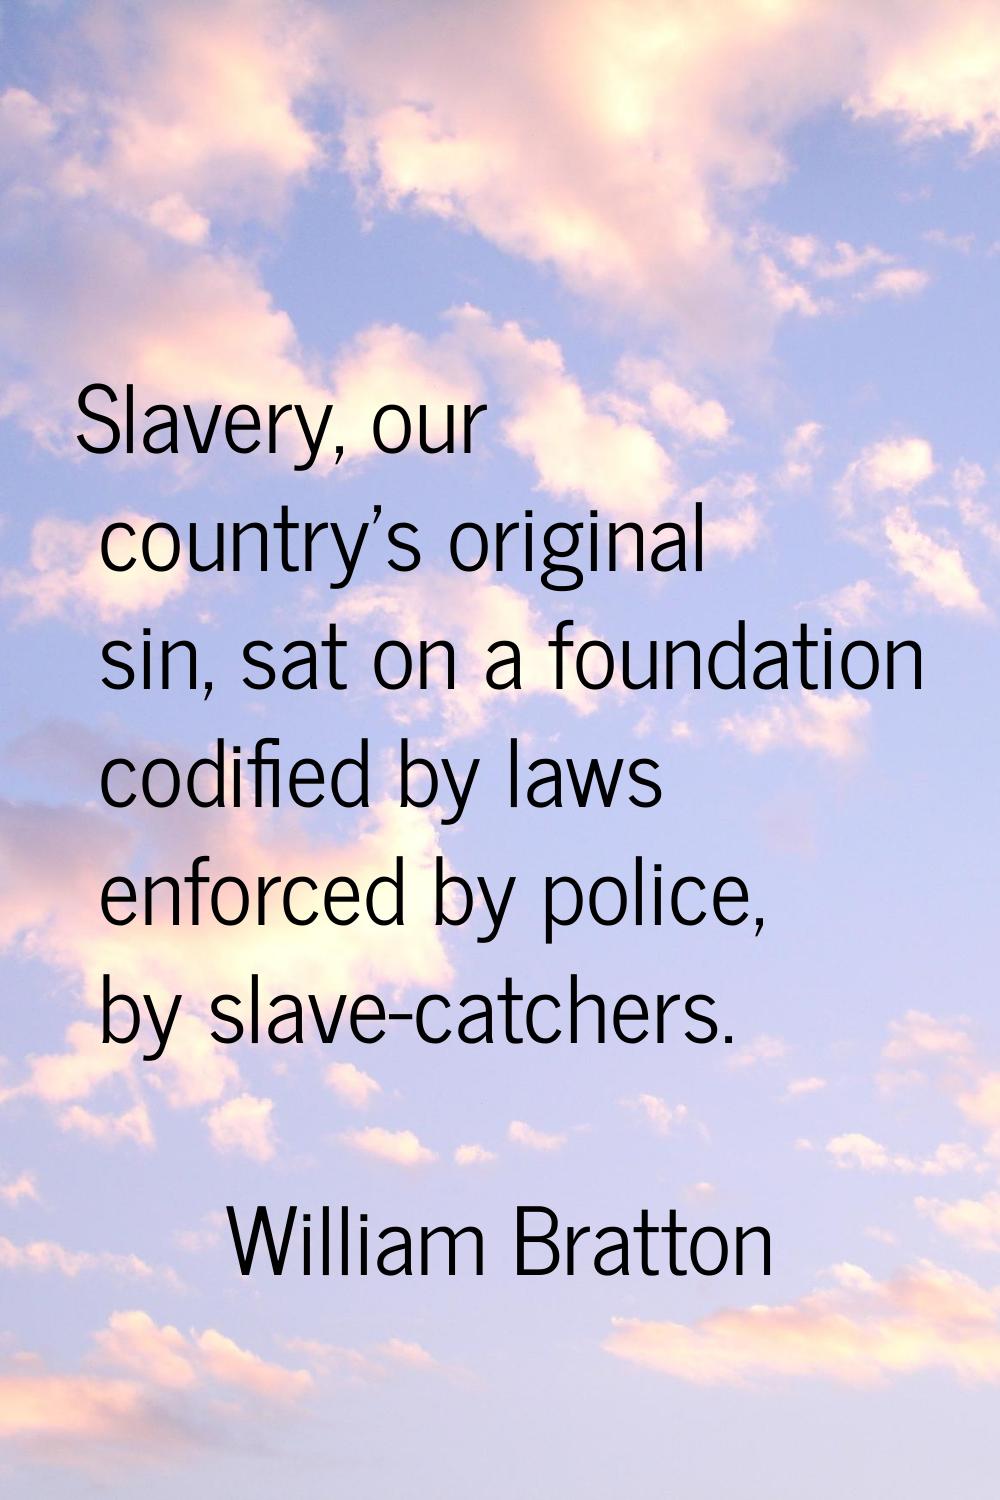 Slavery, our country's original sin, sat on a foundation codified by laws enforced by police, by sl